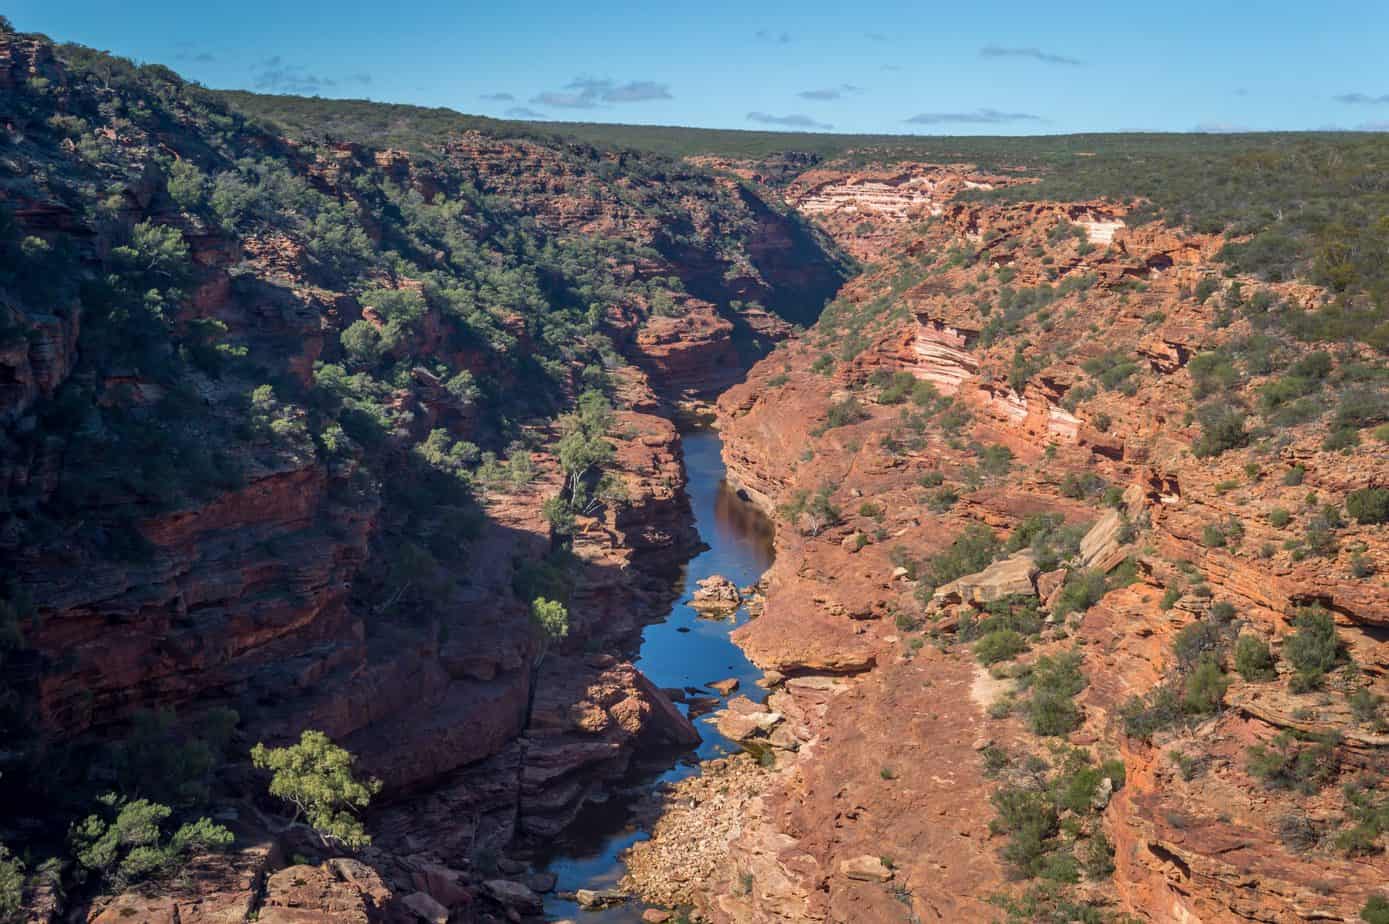 A river breaks through a red canyon covered in grass.